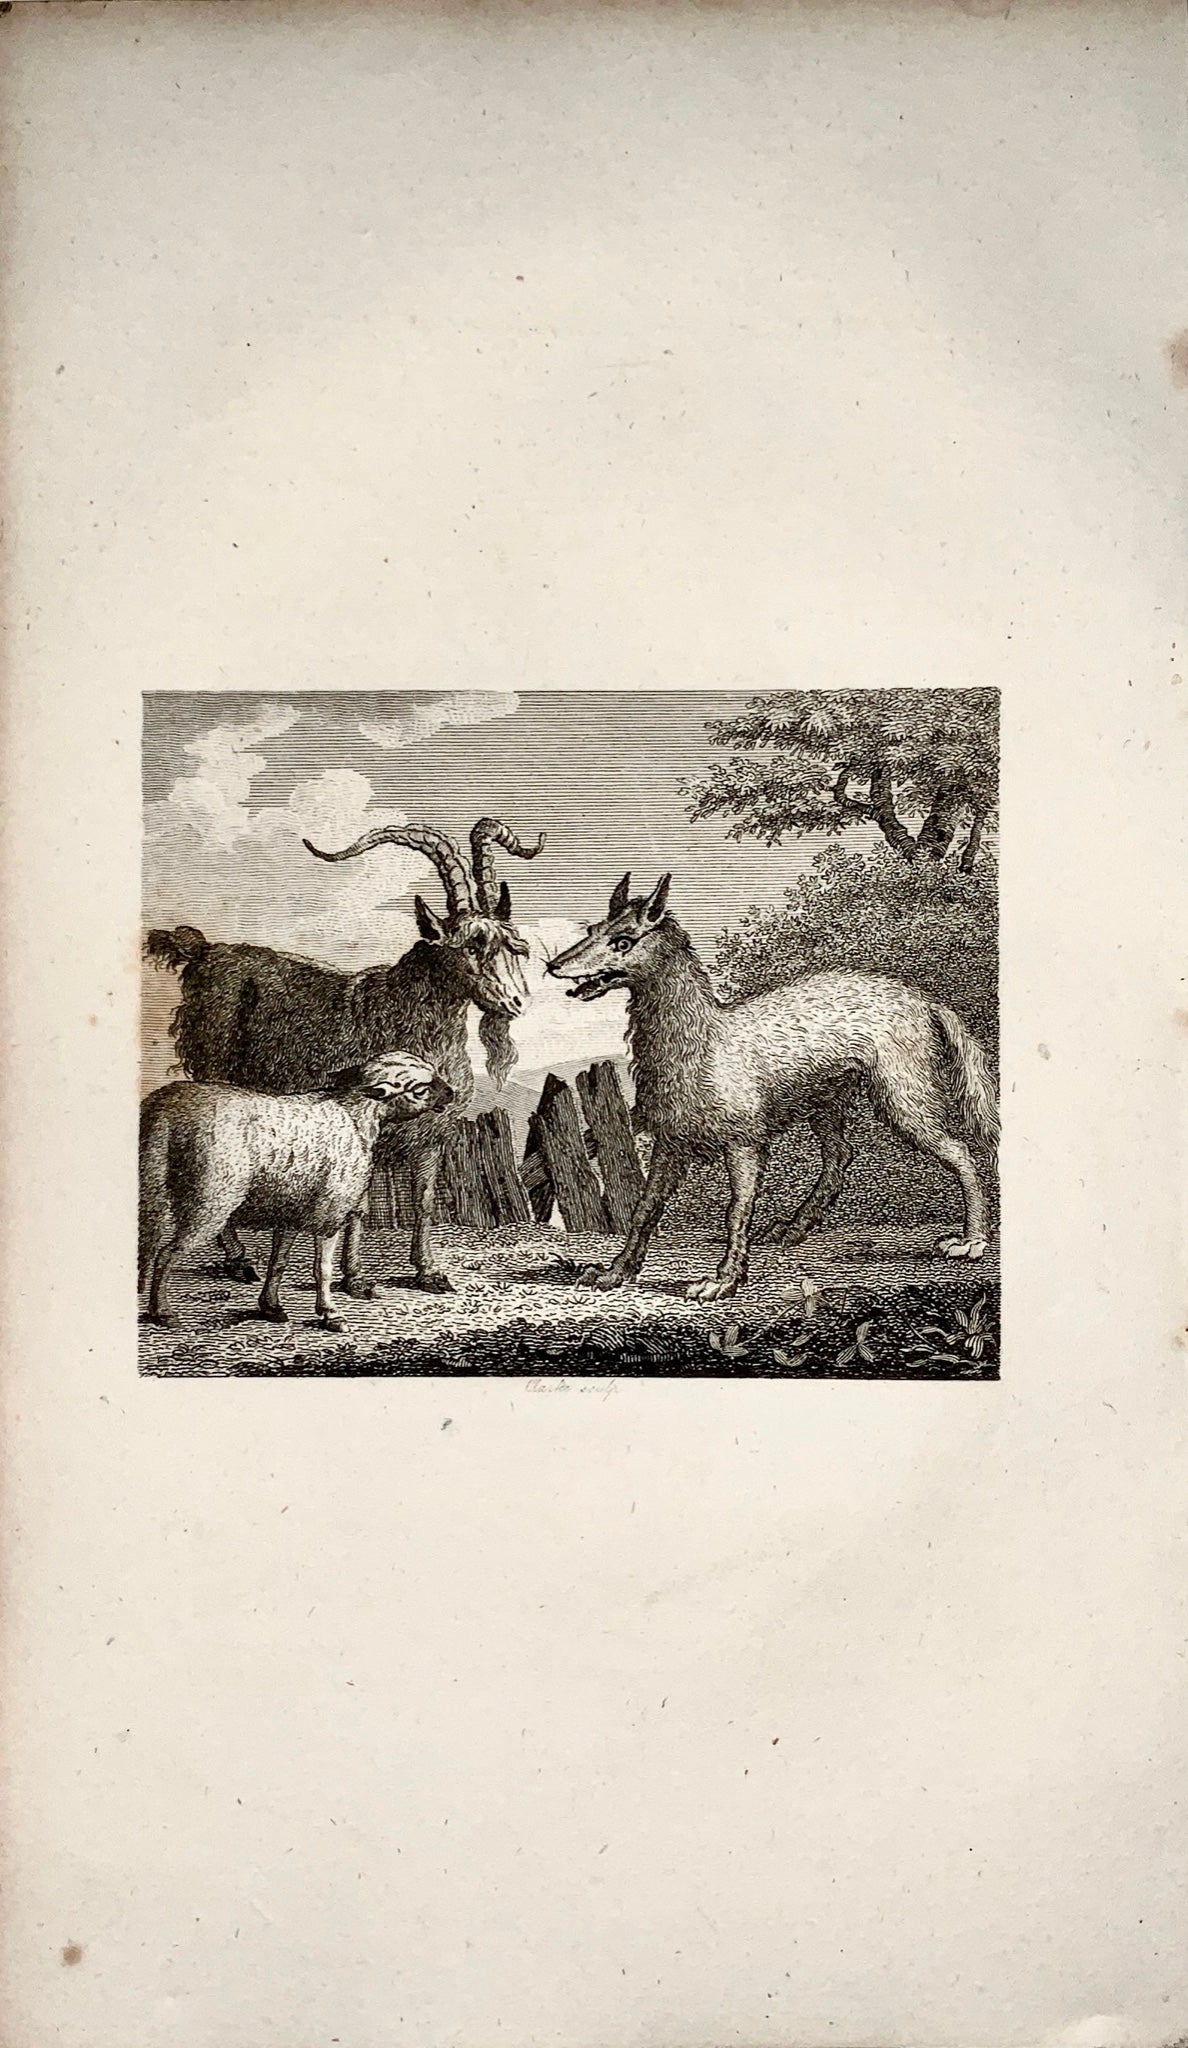 1780 c. Clarke, sculp. - The Wolf, Lamb & the Goat - copper engraving - Fable, Aesop